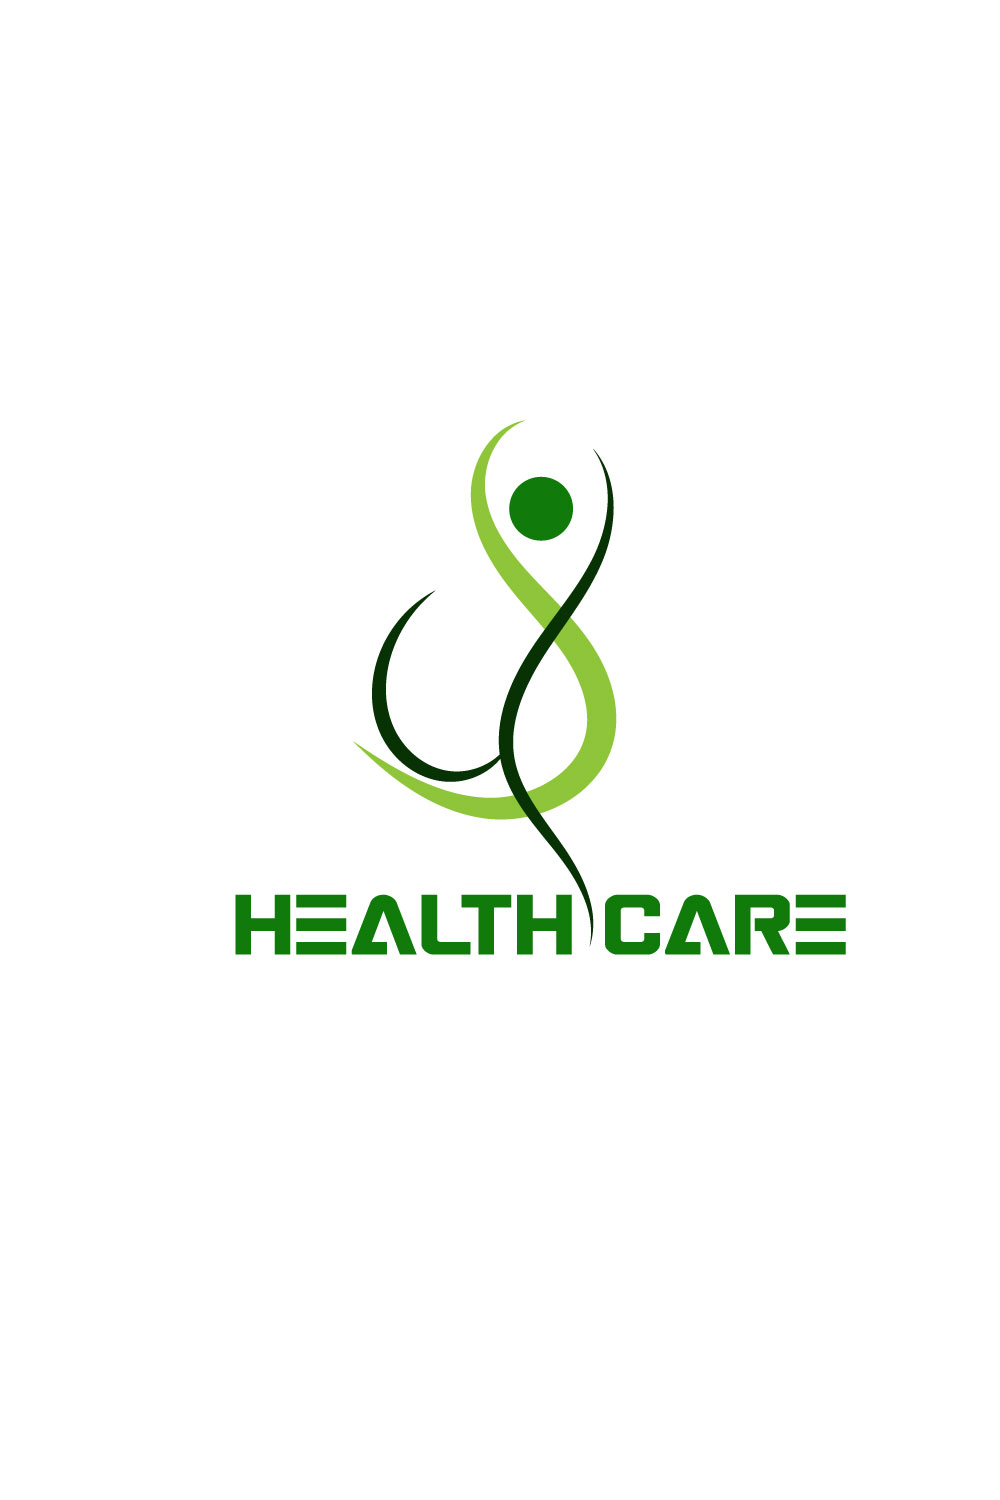 Free Health Care logo pinterest preview image.